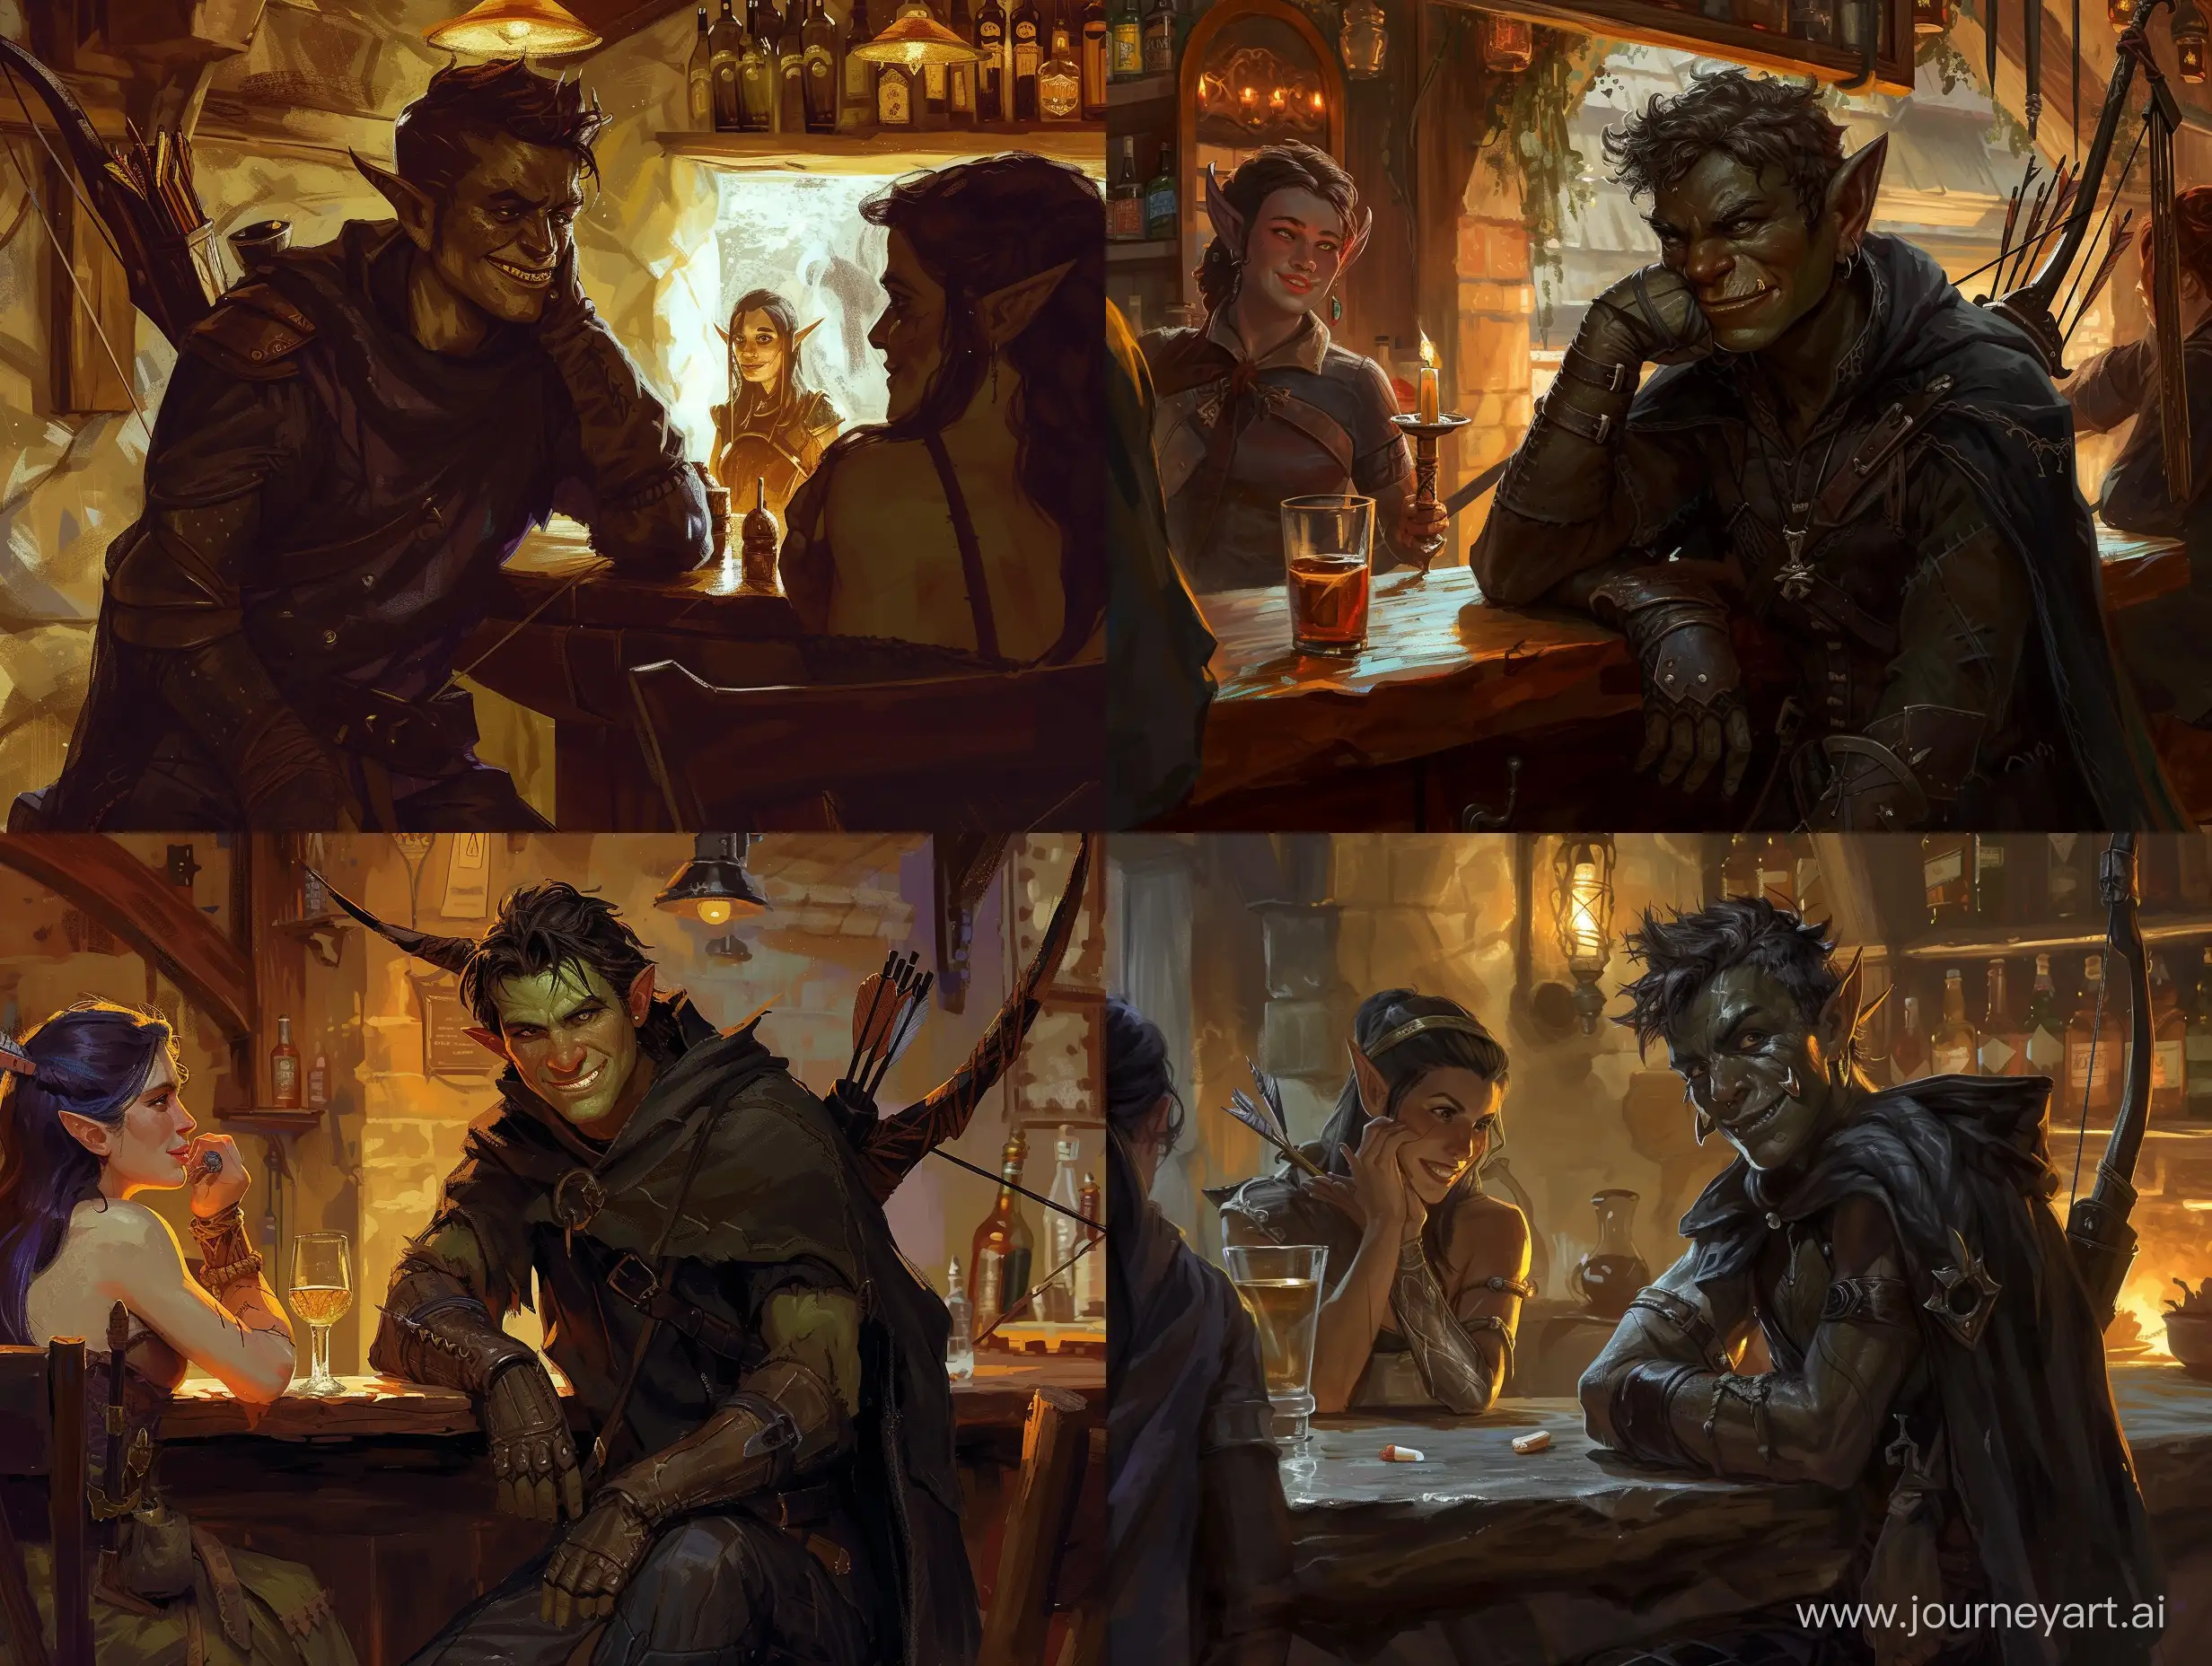 a half-orc, young, a ranger, he has a cocky smirk, carries a longbow, wears a dark cloak, he sits at the bar of a cozy tavern, he is looking at the attractive tiefling barmaid